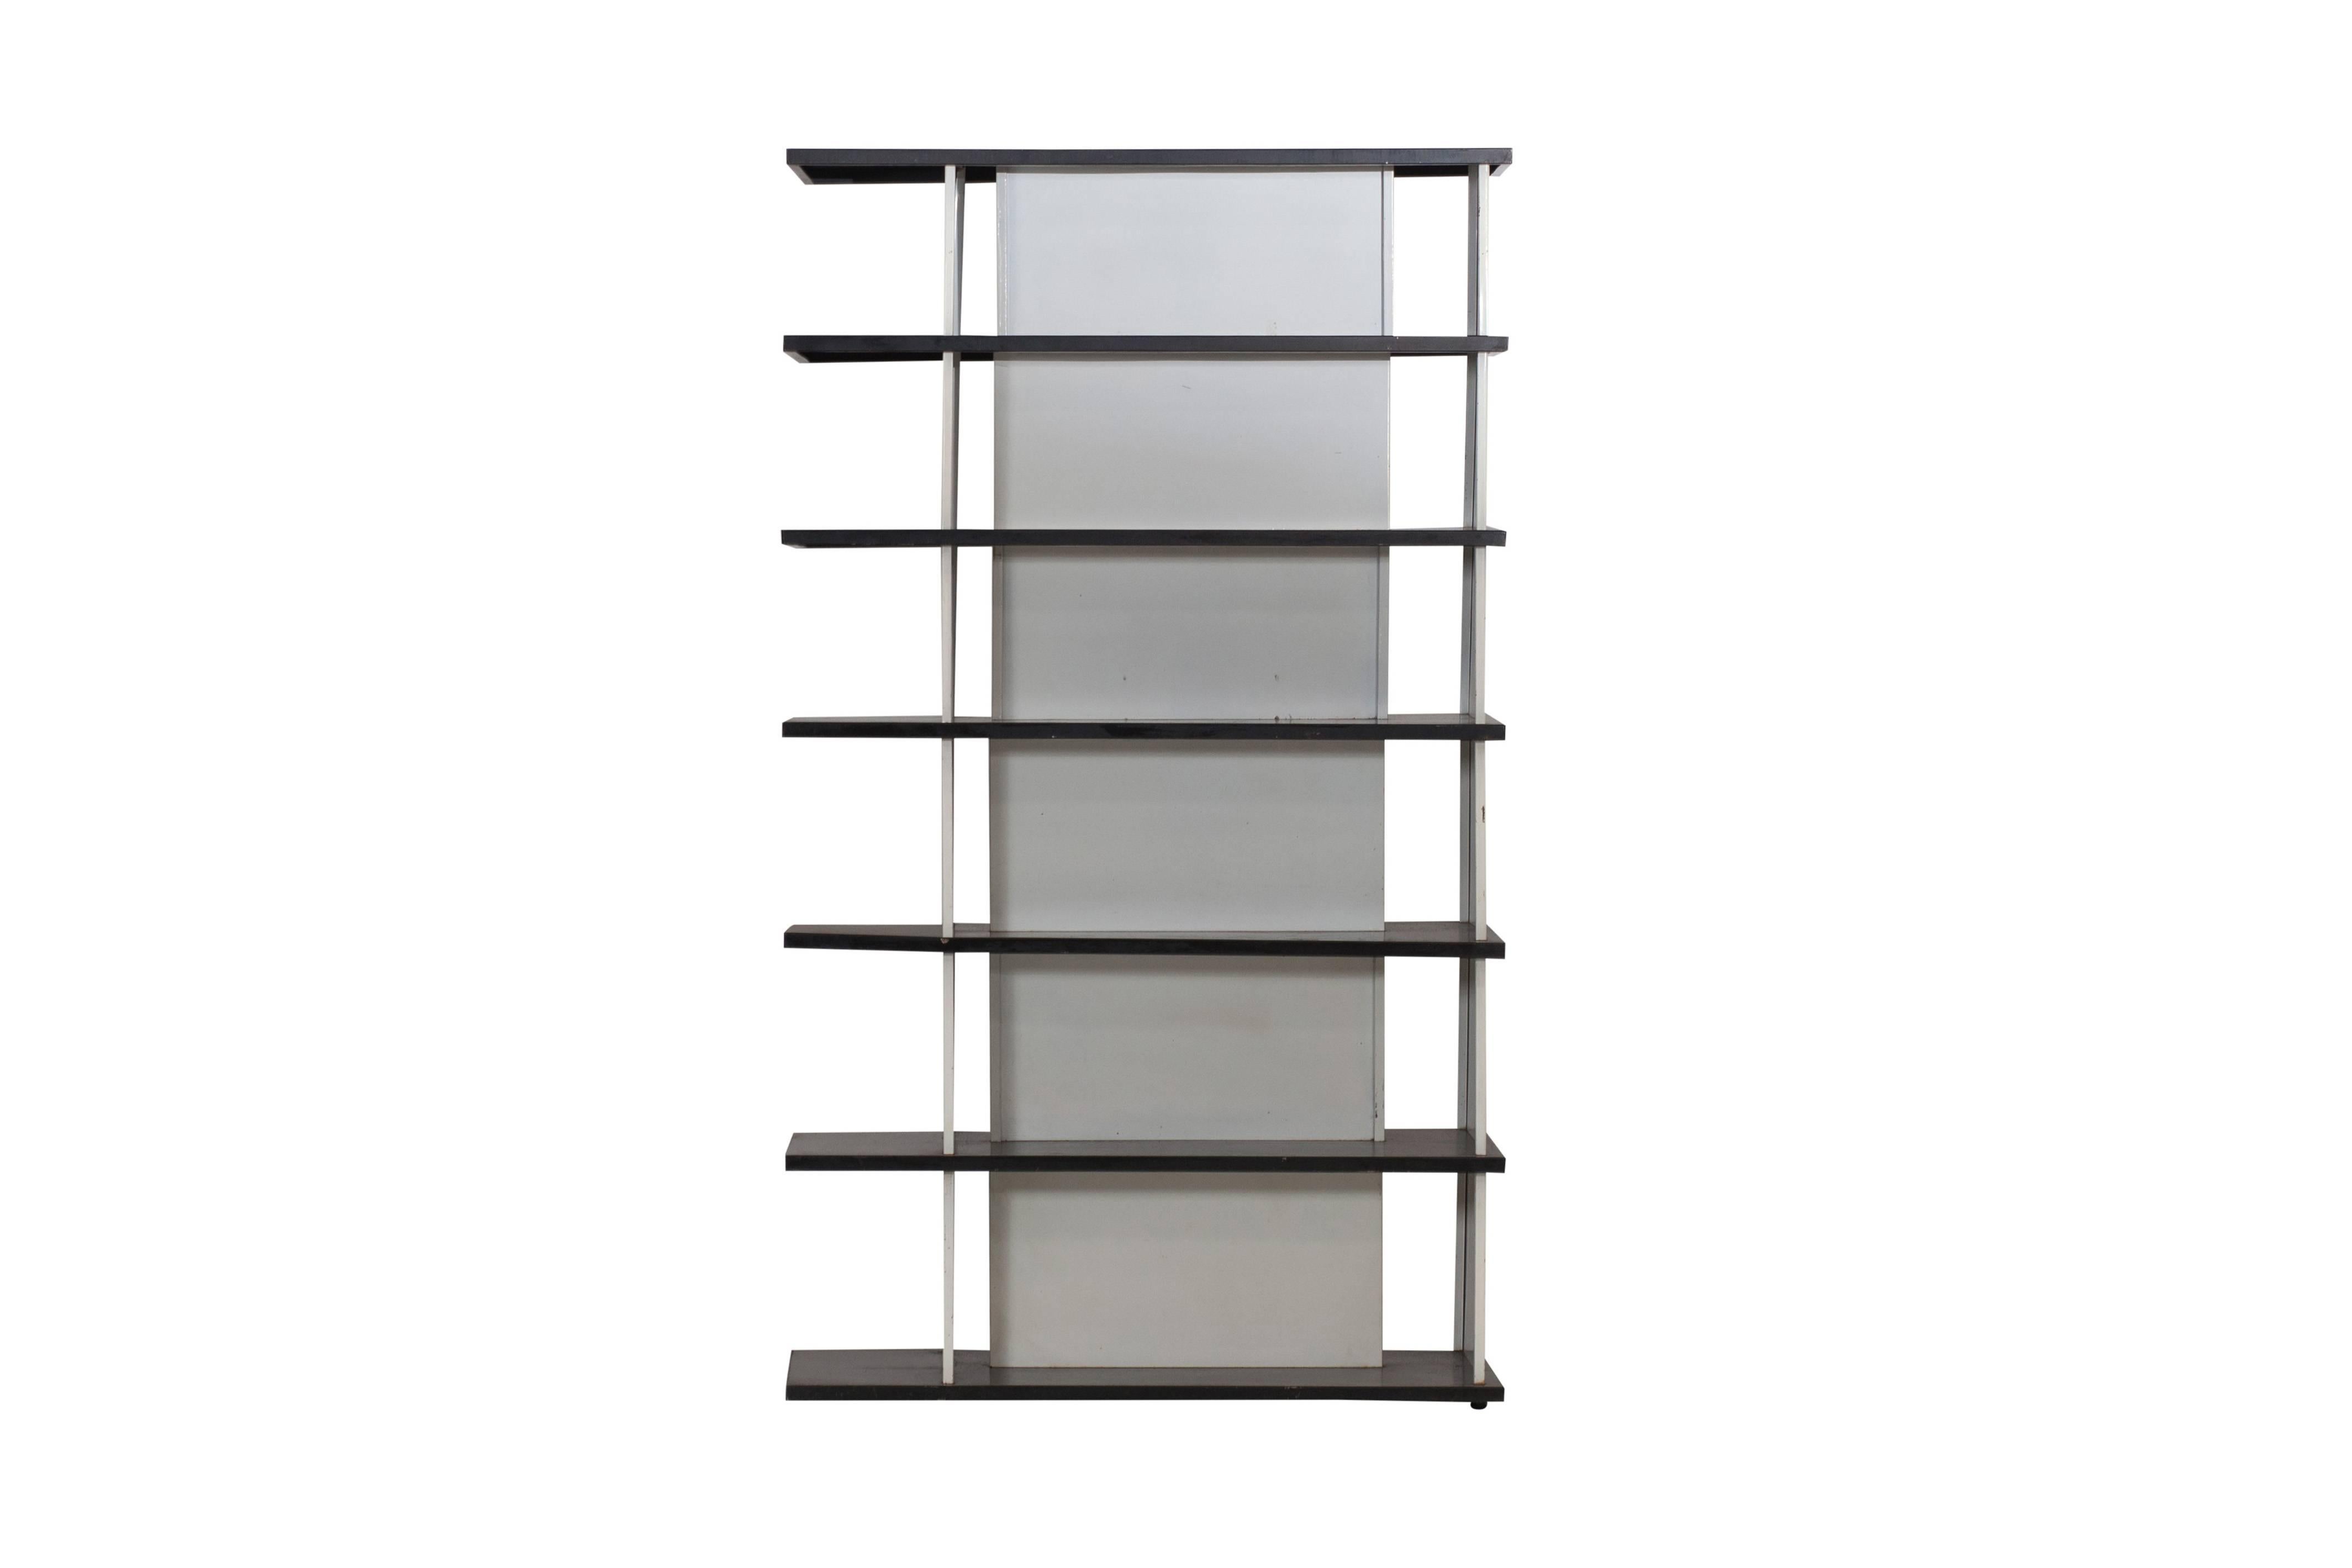 Minimalist Industrial design bookcase or room divider by Industrial designer Wim Rietveld, son of Gerrit Rietveld. The origin of this bookcase was a big question, but it was made for exclusive department store De Bijenkorf in 1960. De Bijenkorf sold